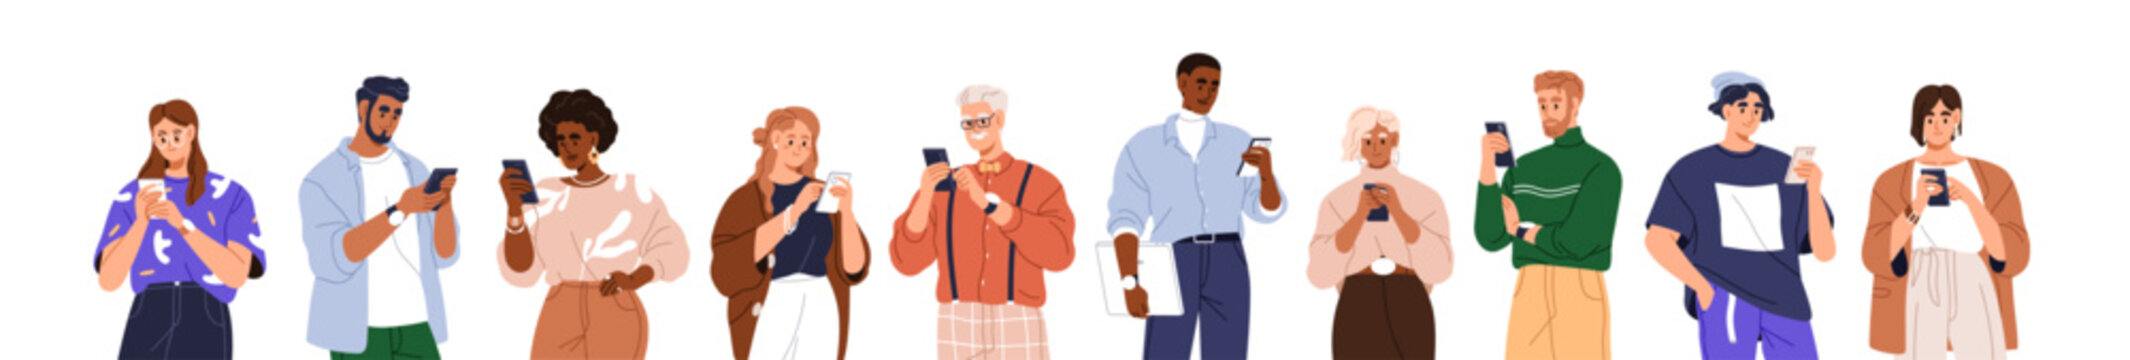 people holding, using mobile phones set. characters with smartphones in hands. men, women use cellph